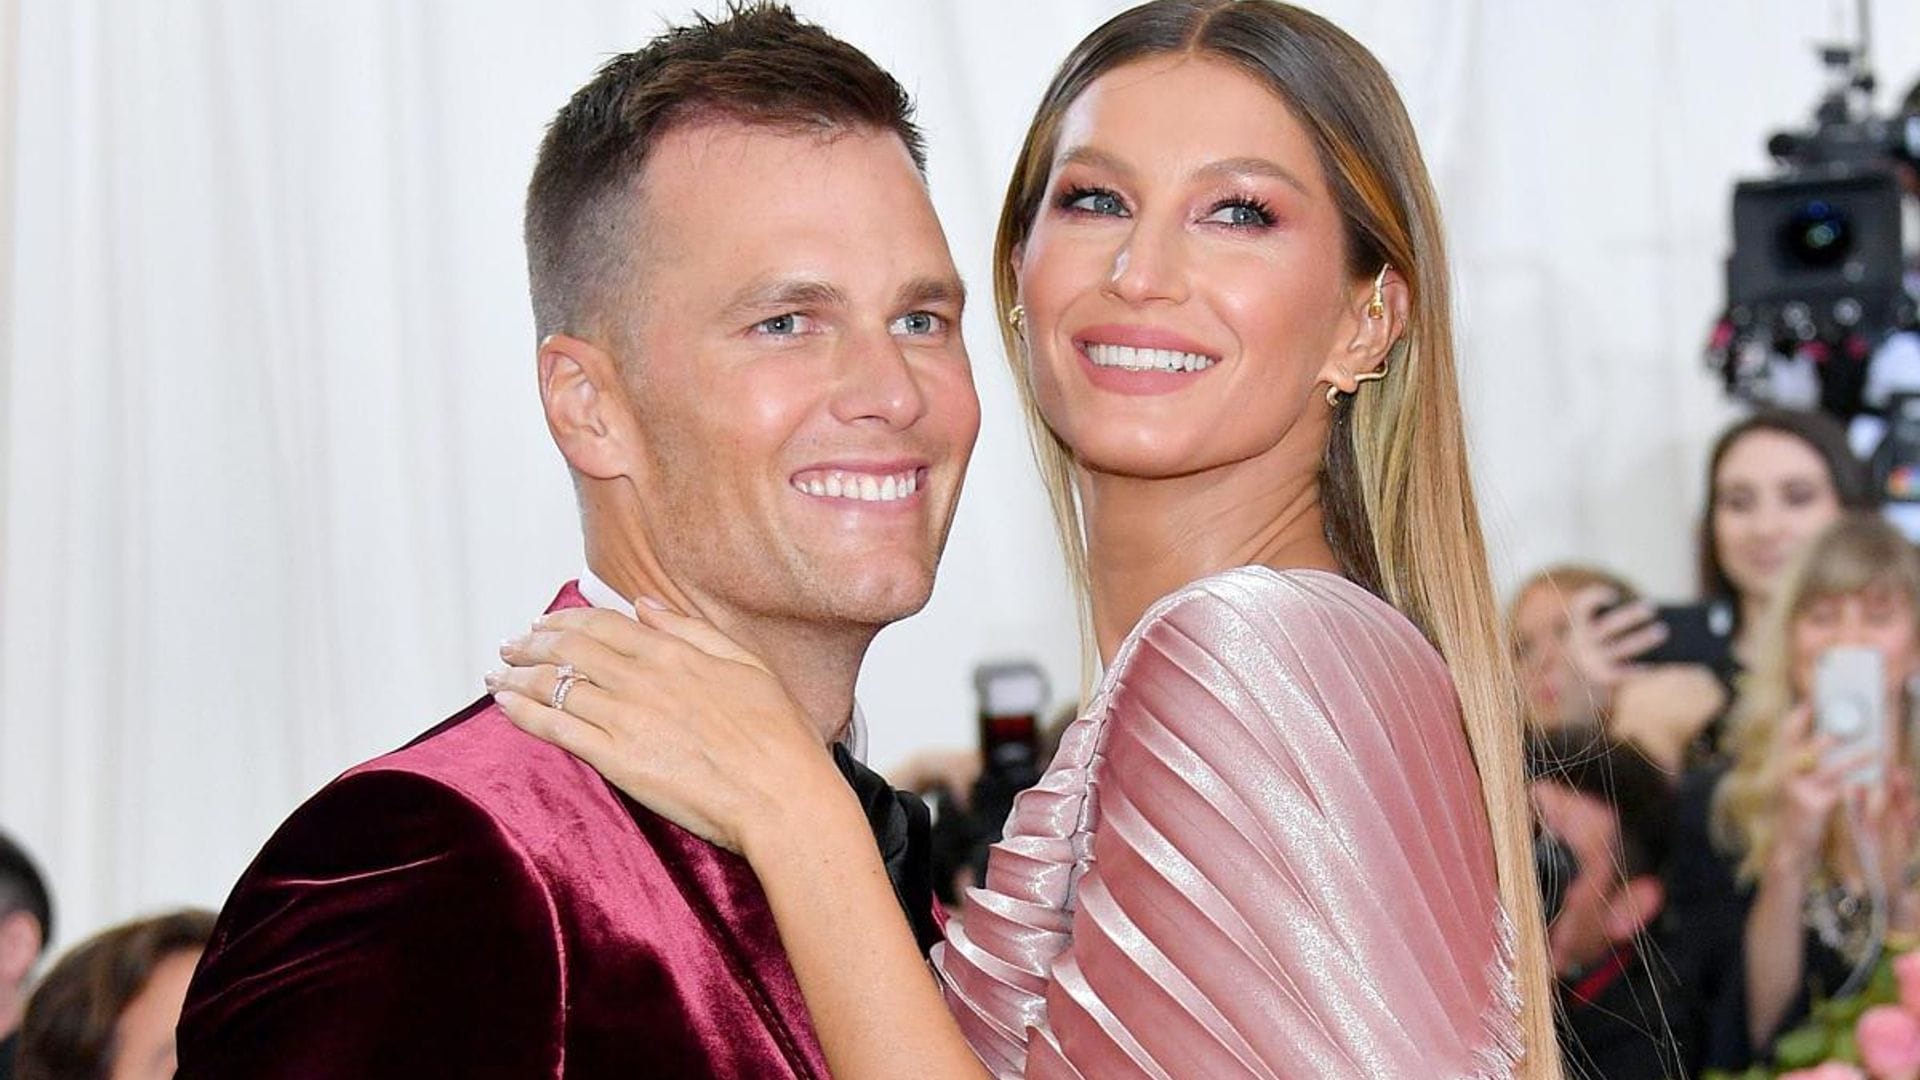 Gisele Bündchen gets emotional about her divorce for the first time: ‘The death of my dream’